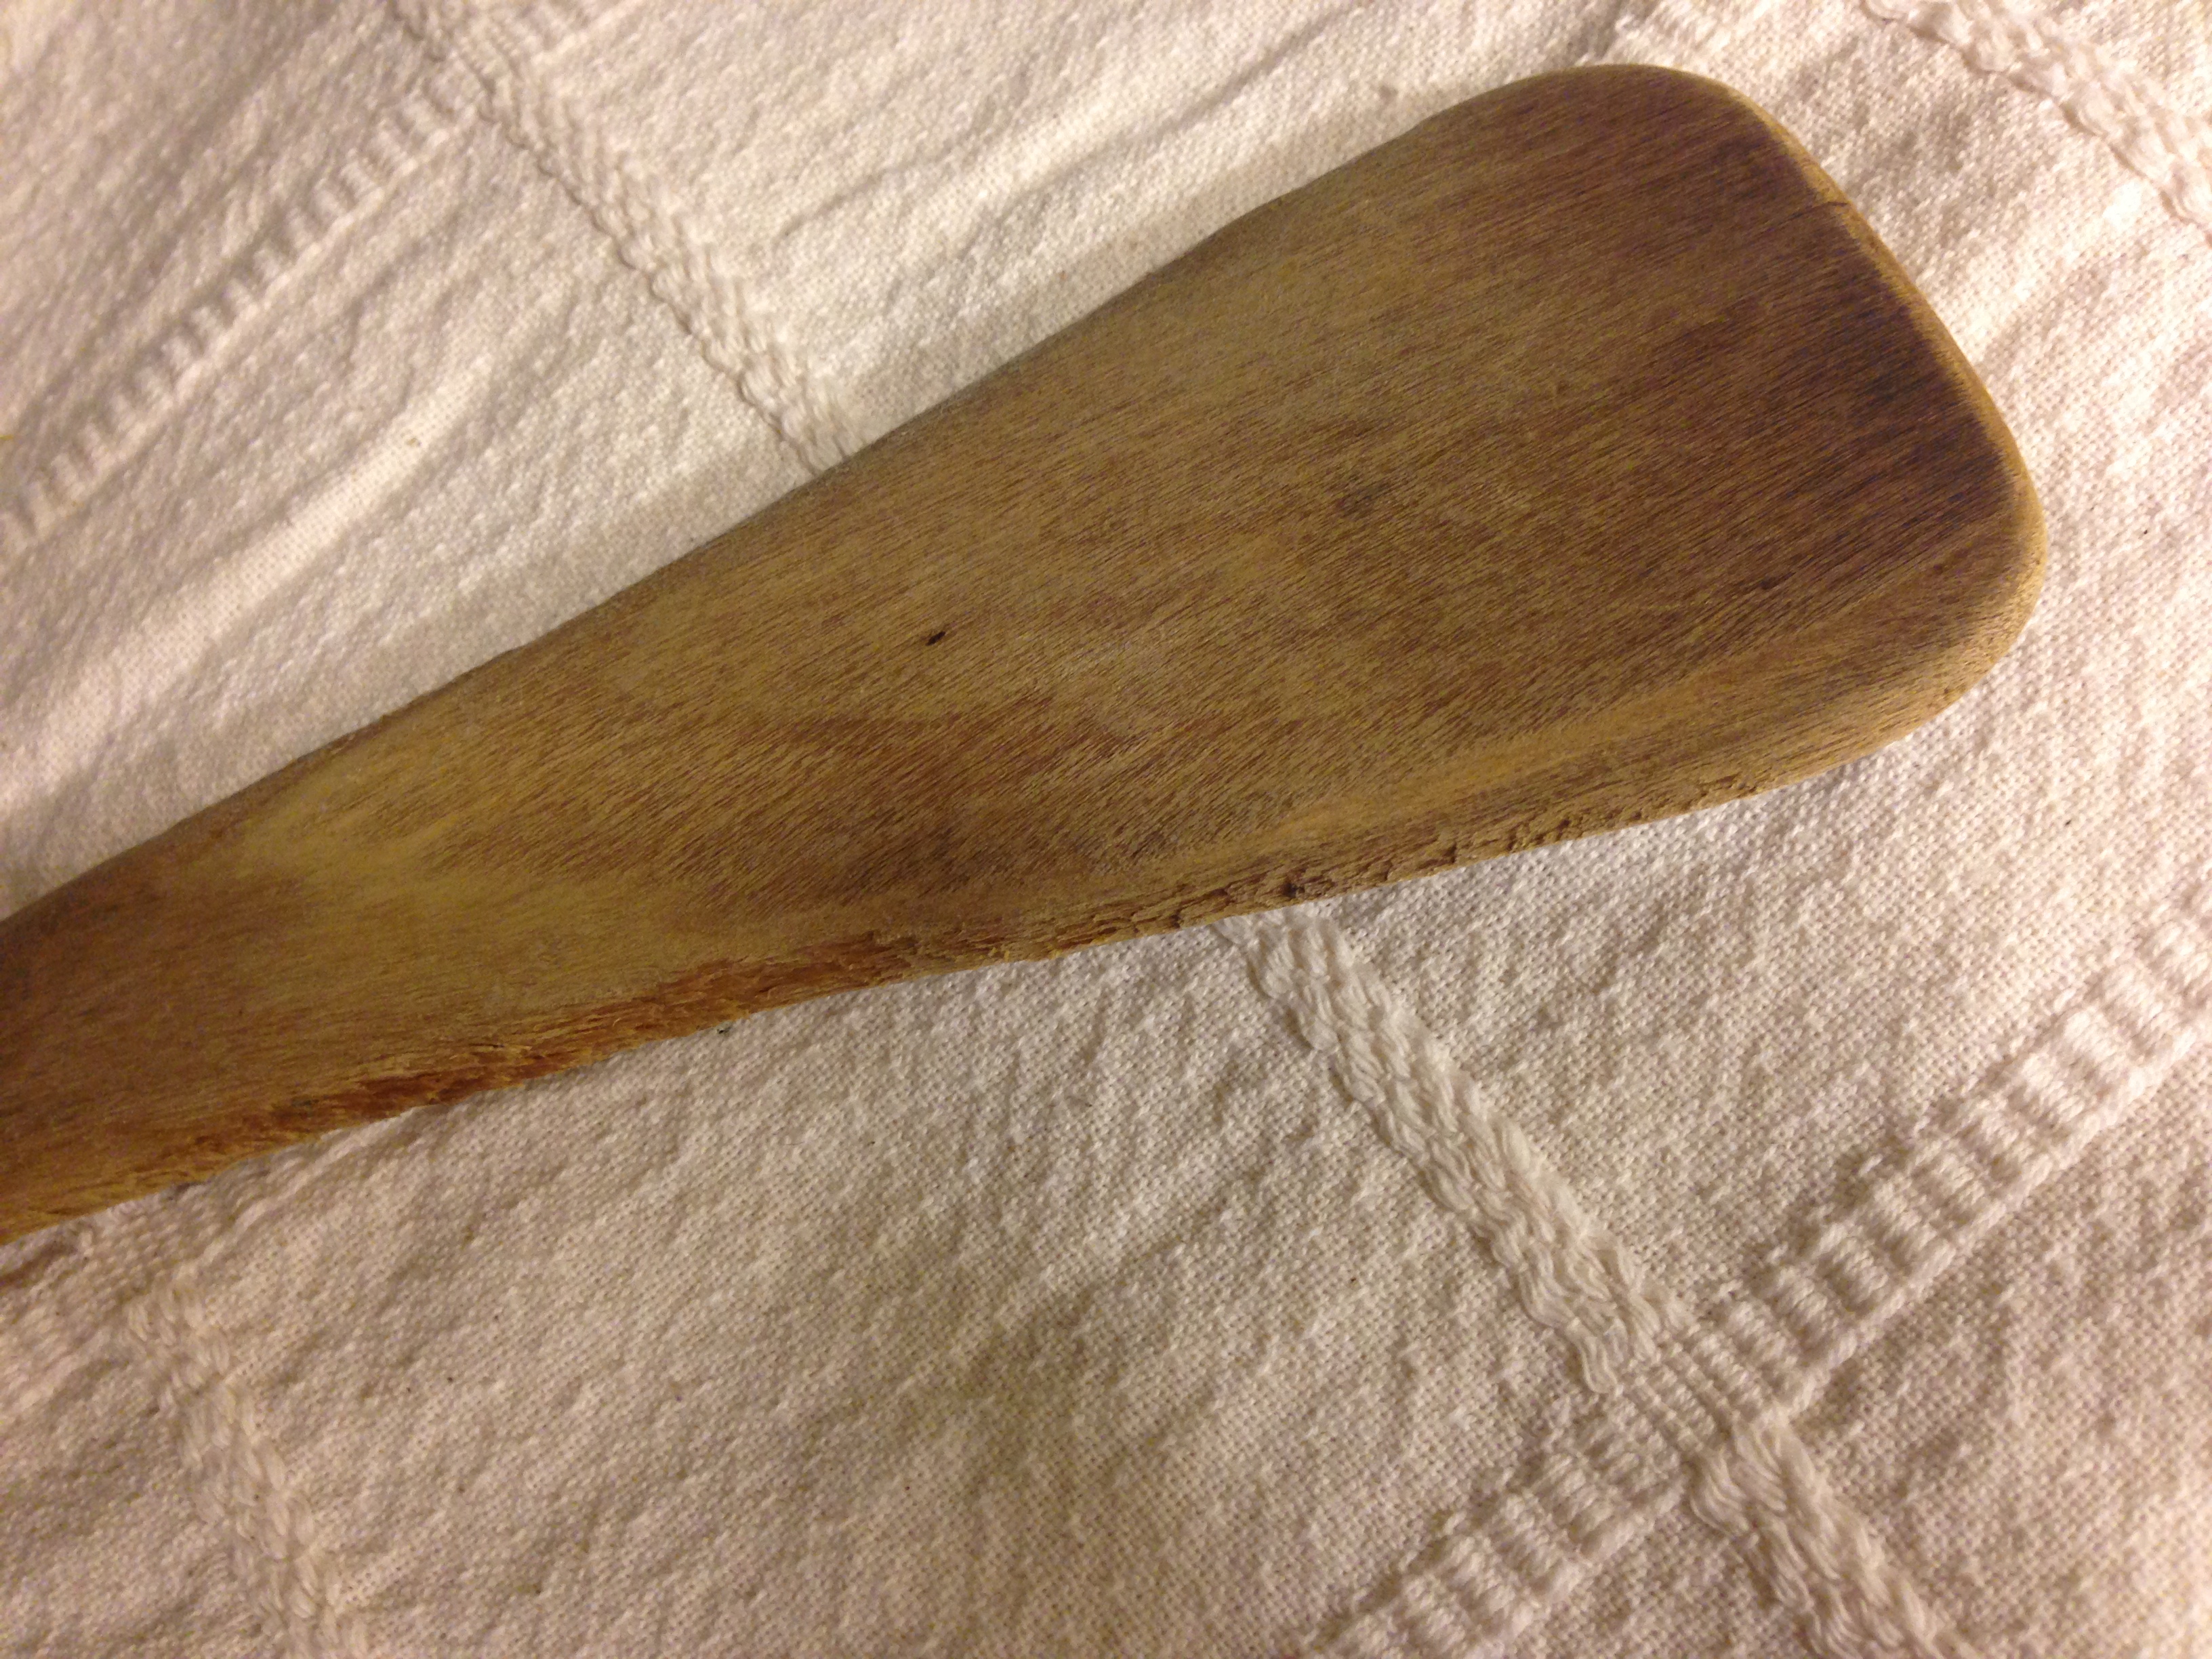 a wooden spoon on a white cloth